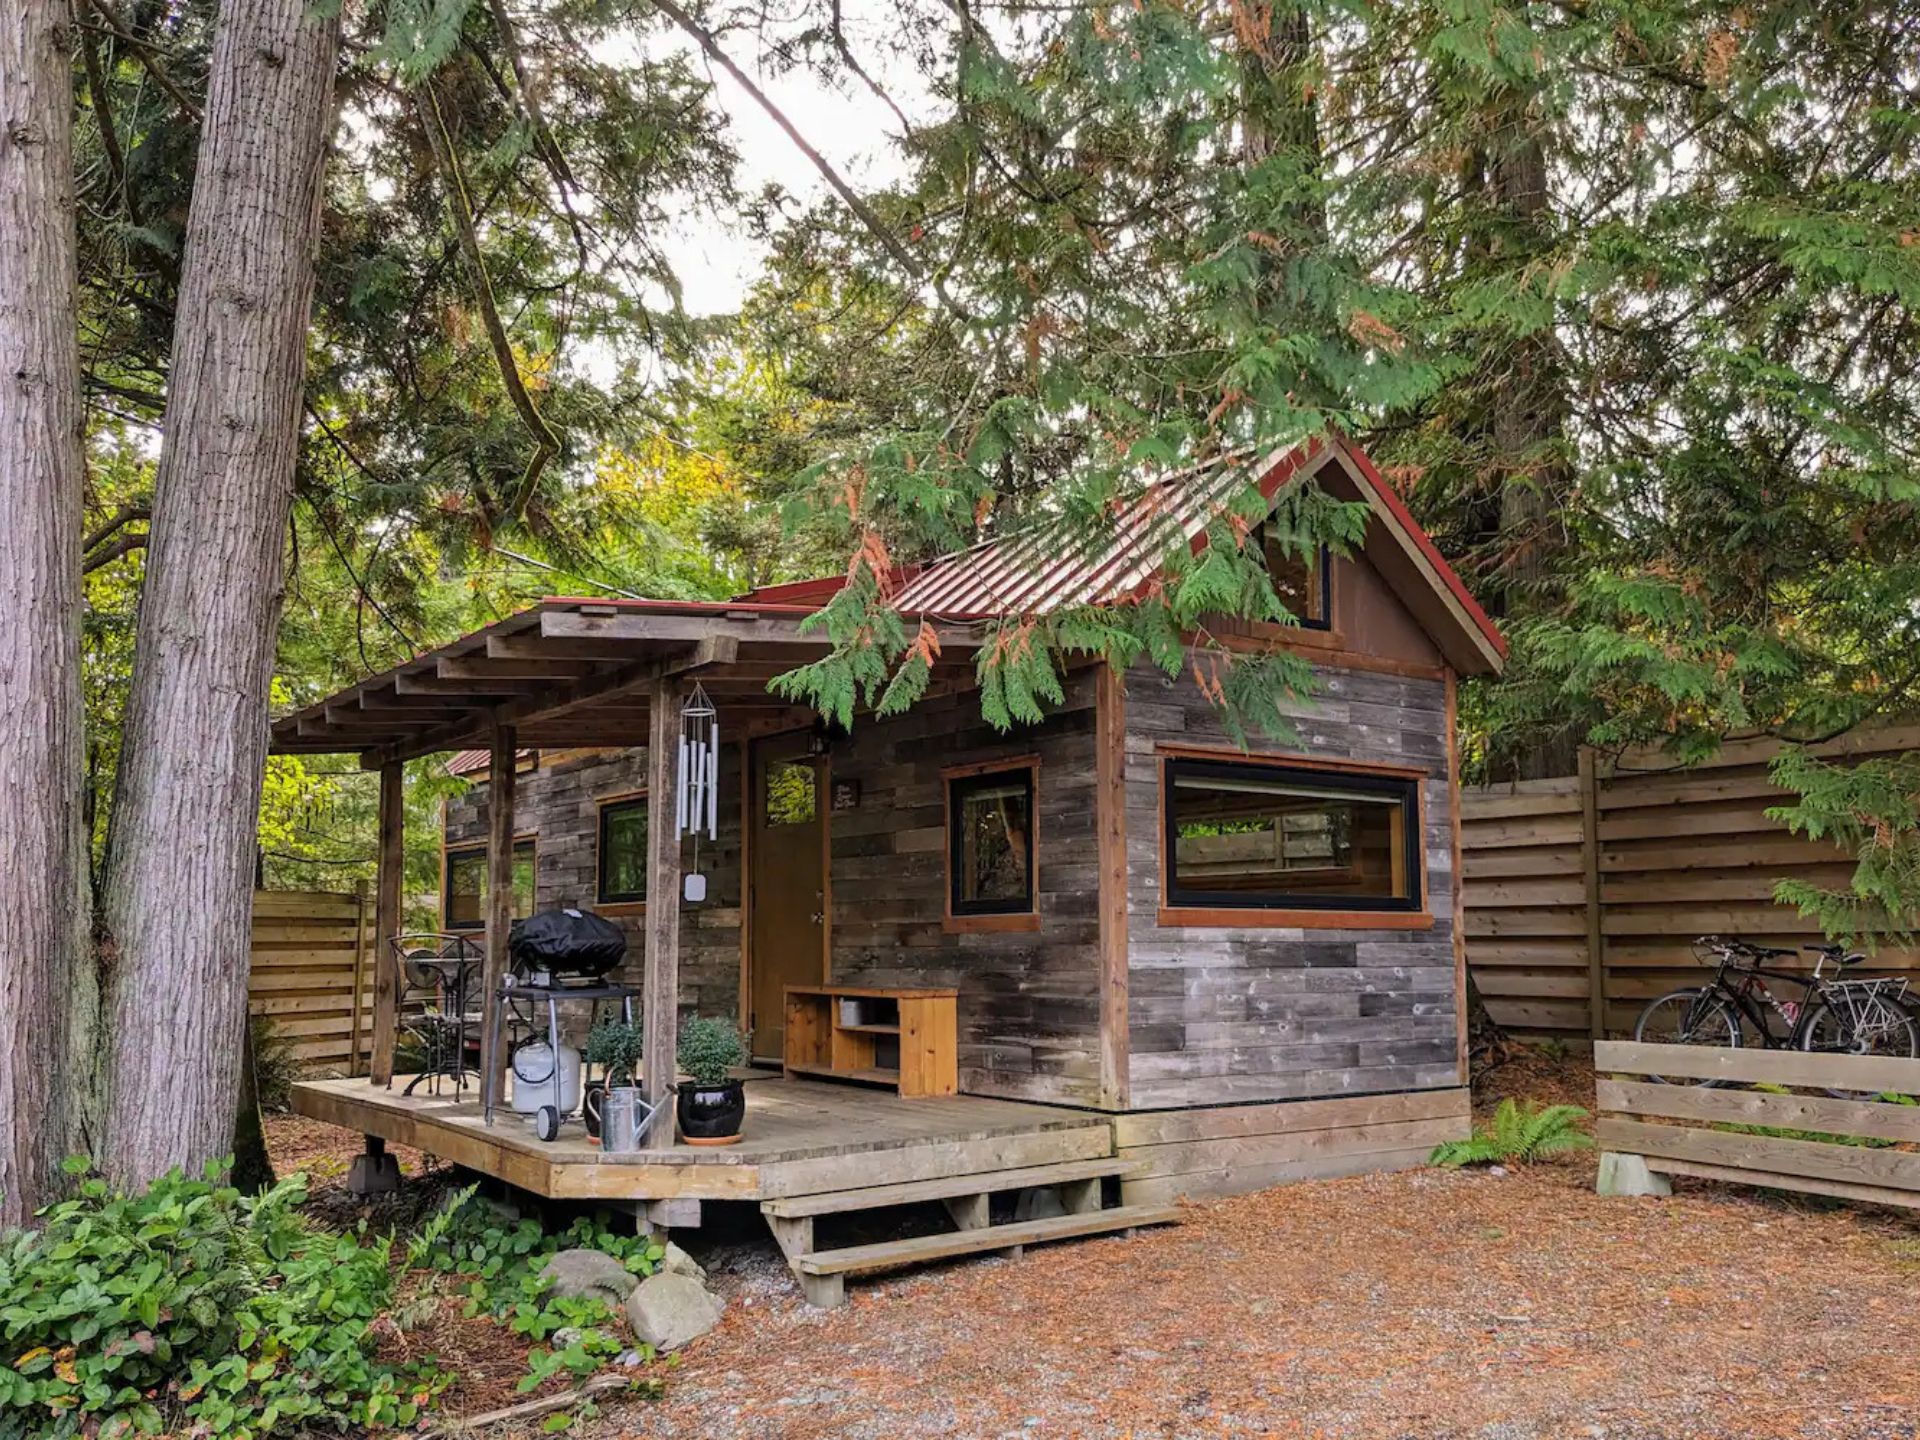 Pocket-Sized Home located in nature, with small porch